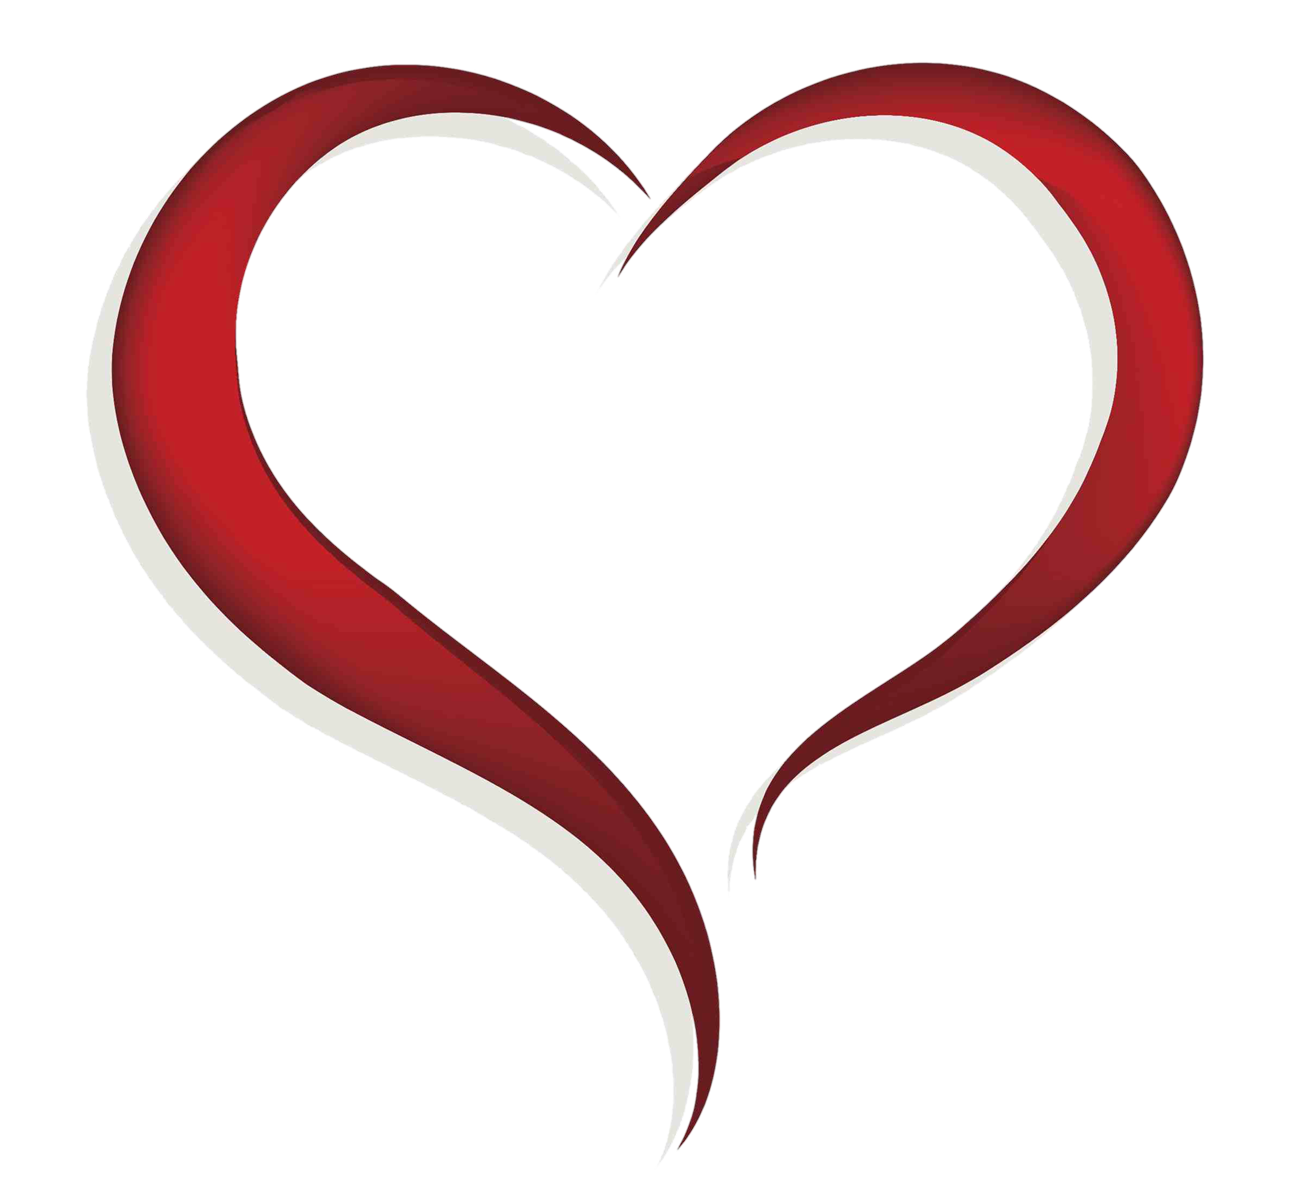 Heart outline clipart png